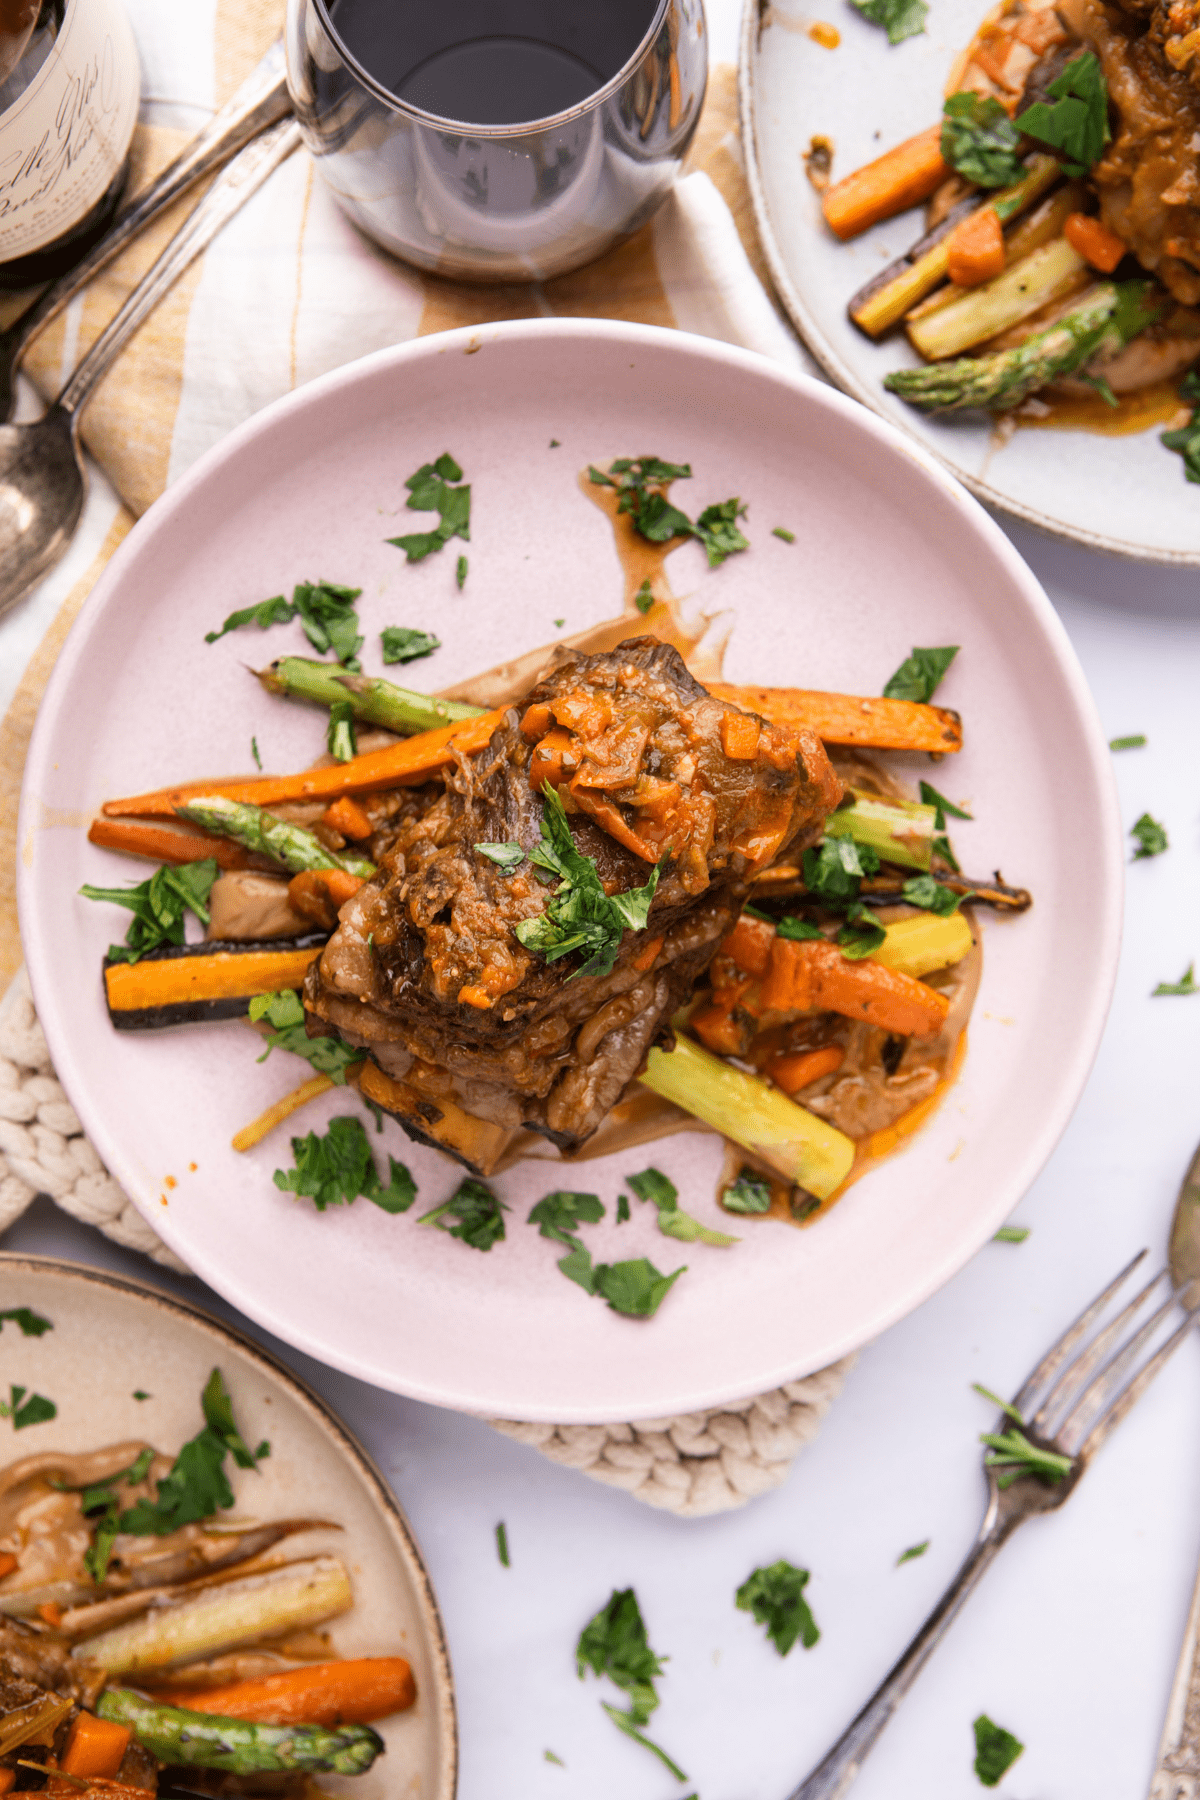 Braised beef short ribs with color carrots on round pink dish. 